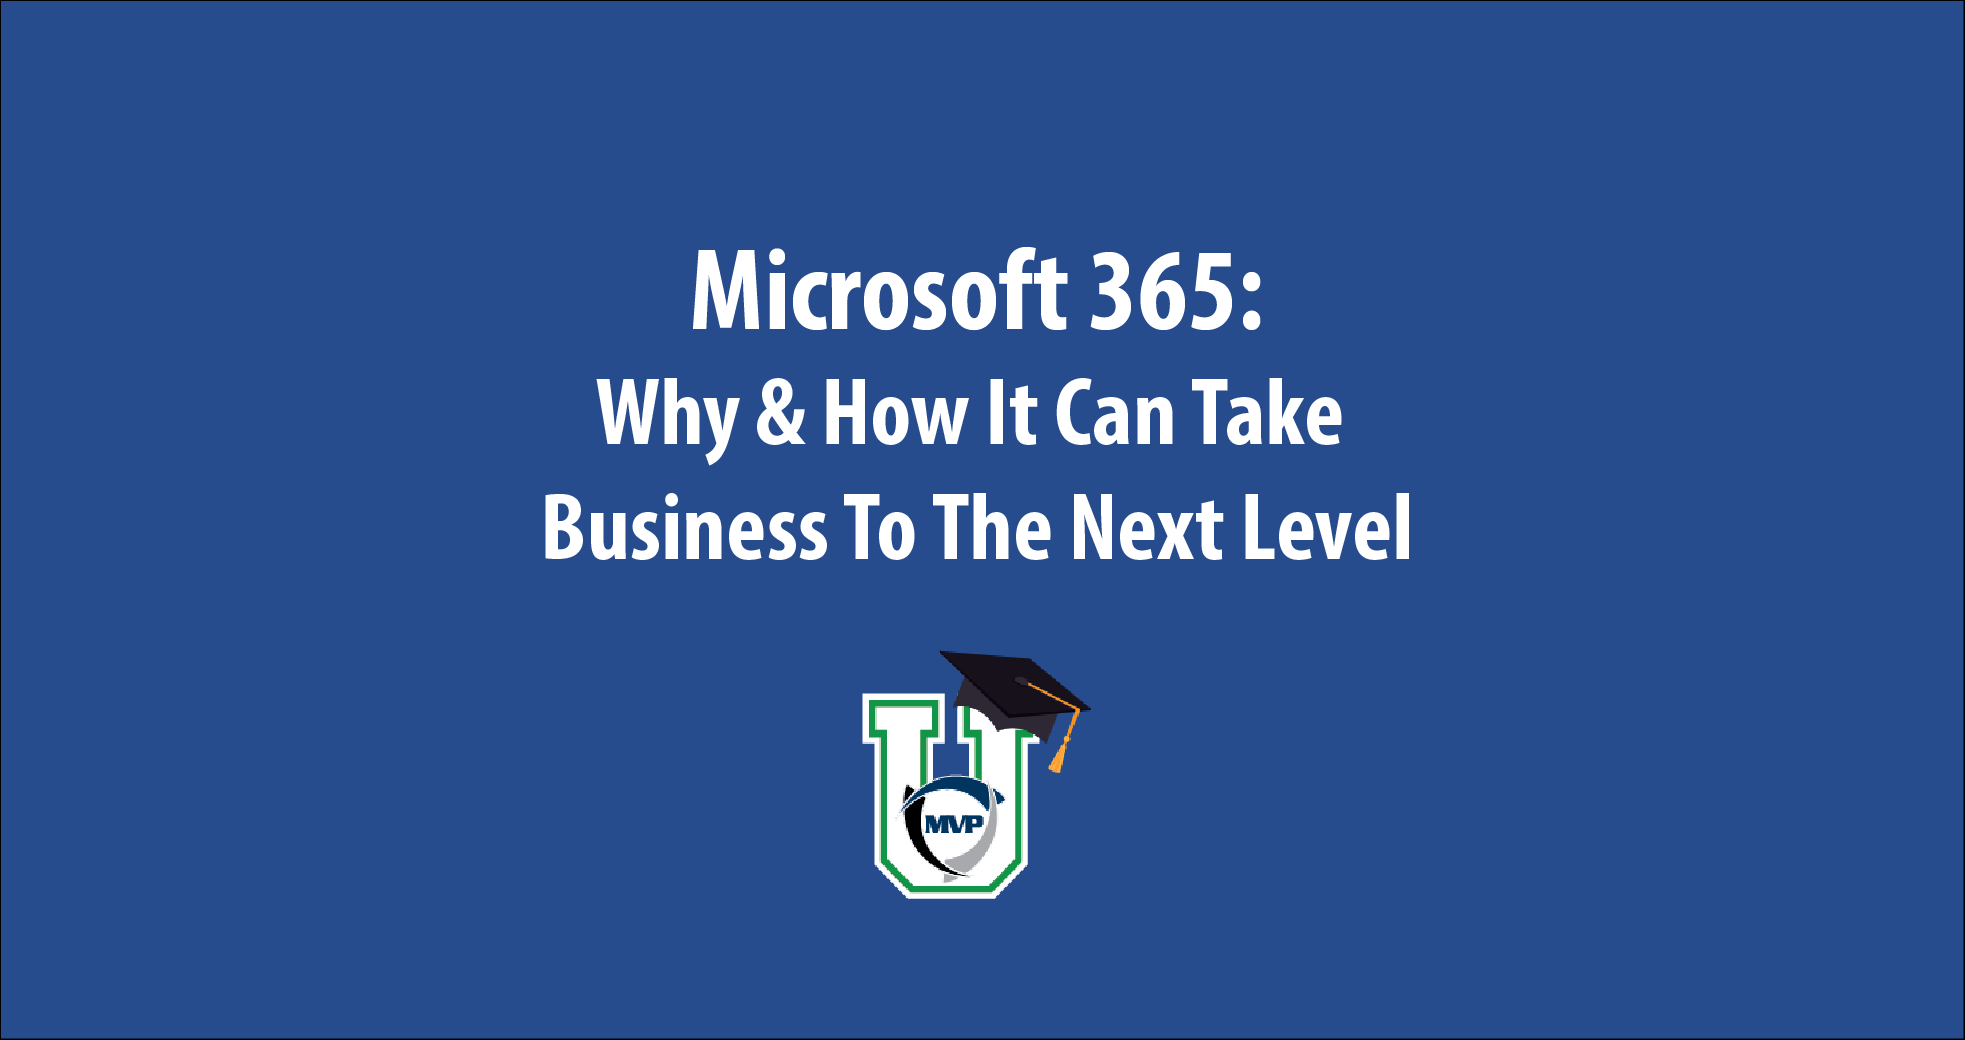 Microsoft 365: Why & How It Can Take Business To The Next Level